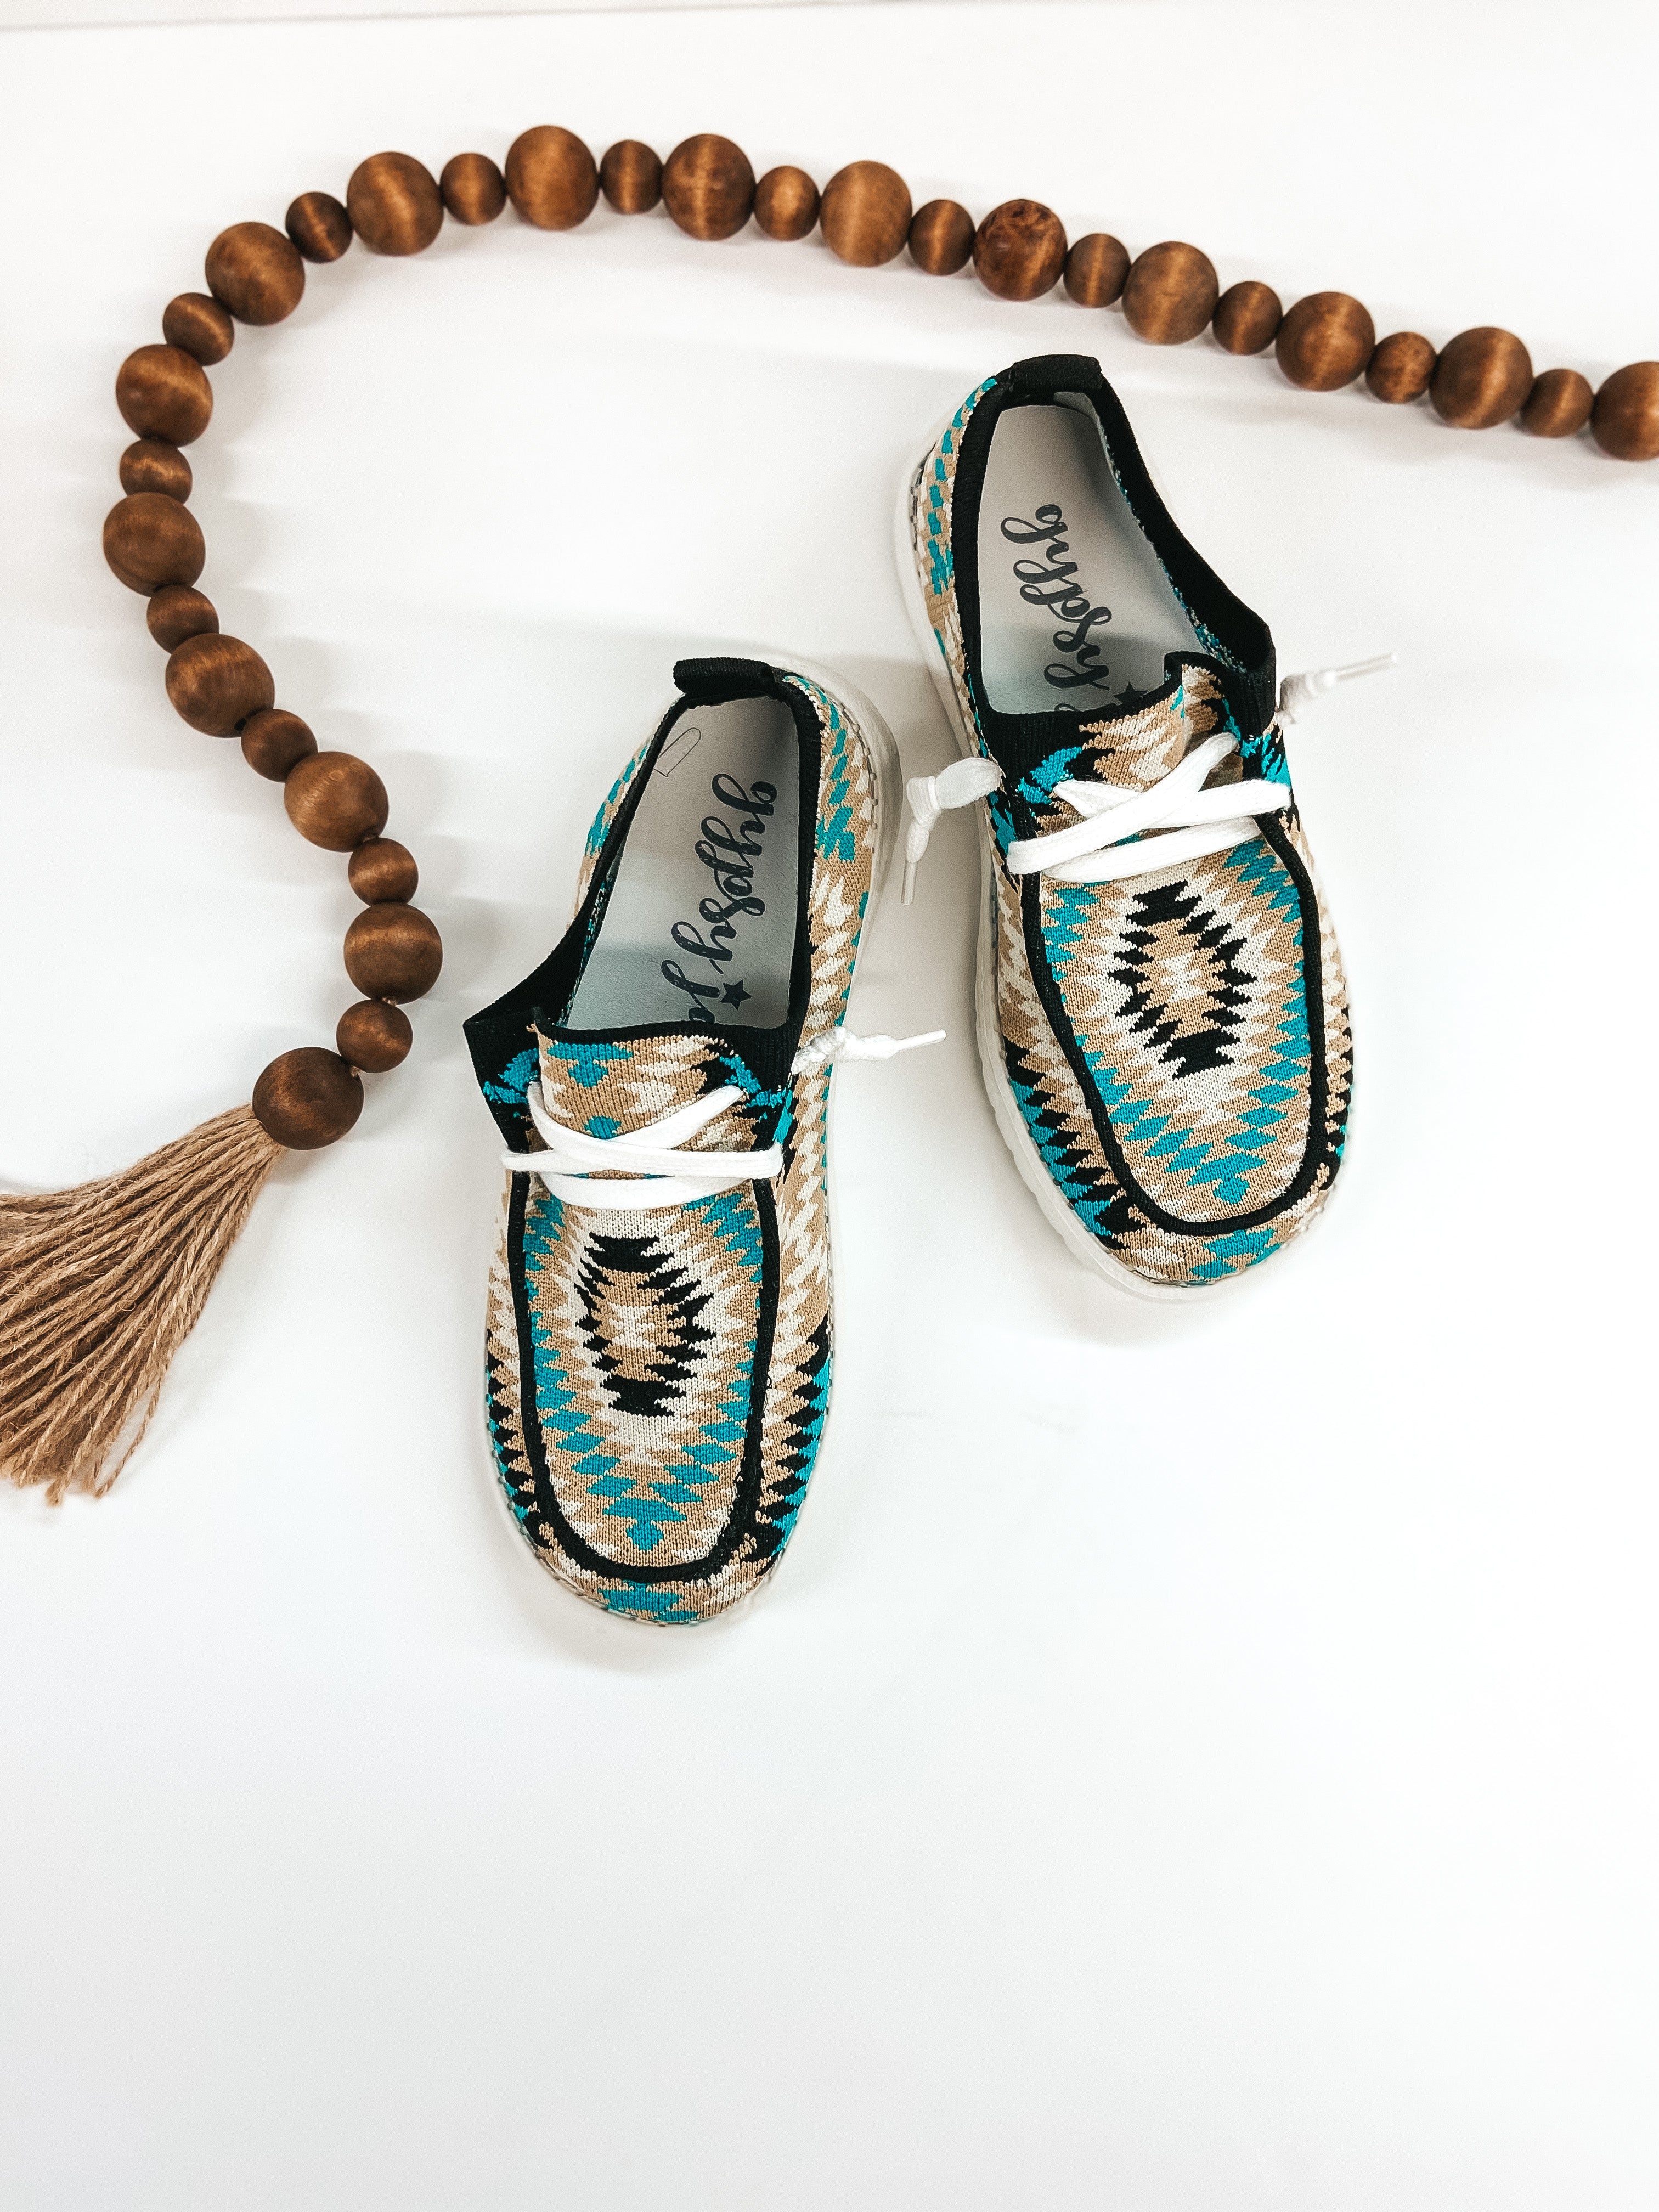 Very G | Have To Run Knit Stretch Slip On Loafers with Laces in Turquoise and Black - Giddy Up Glamour Boutique